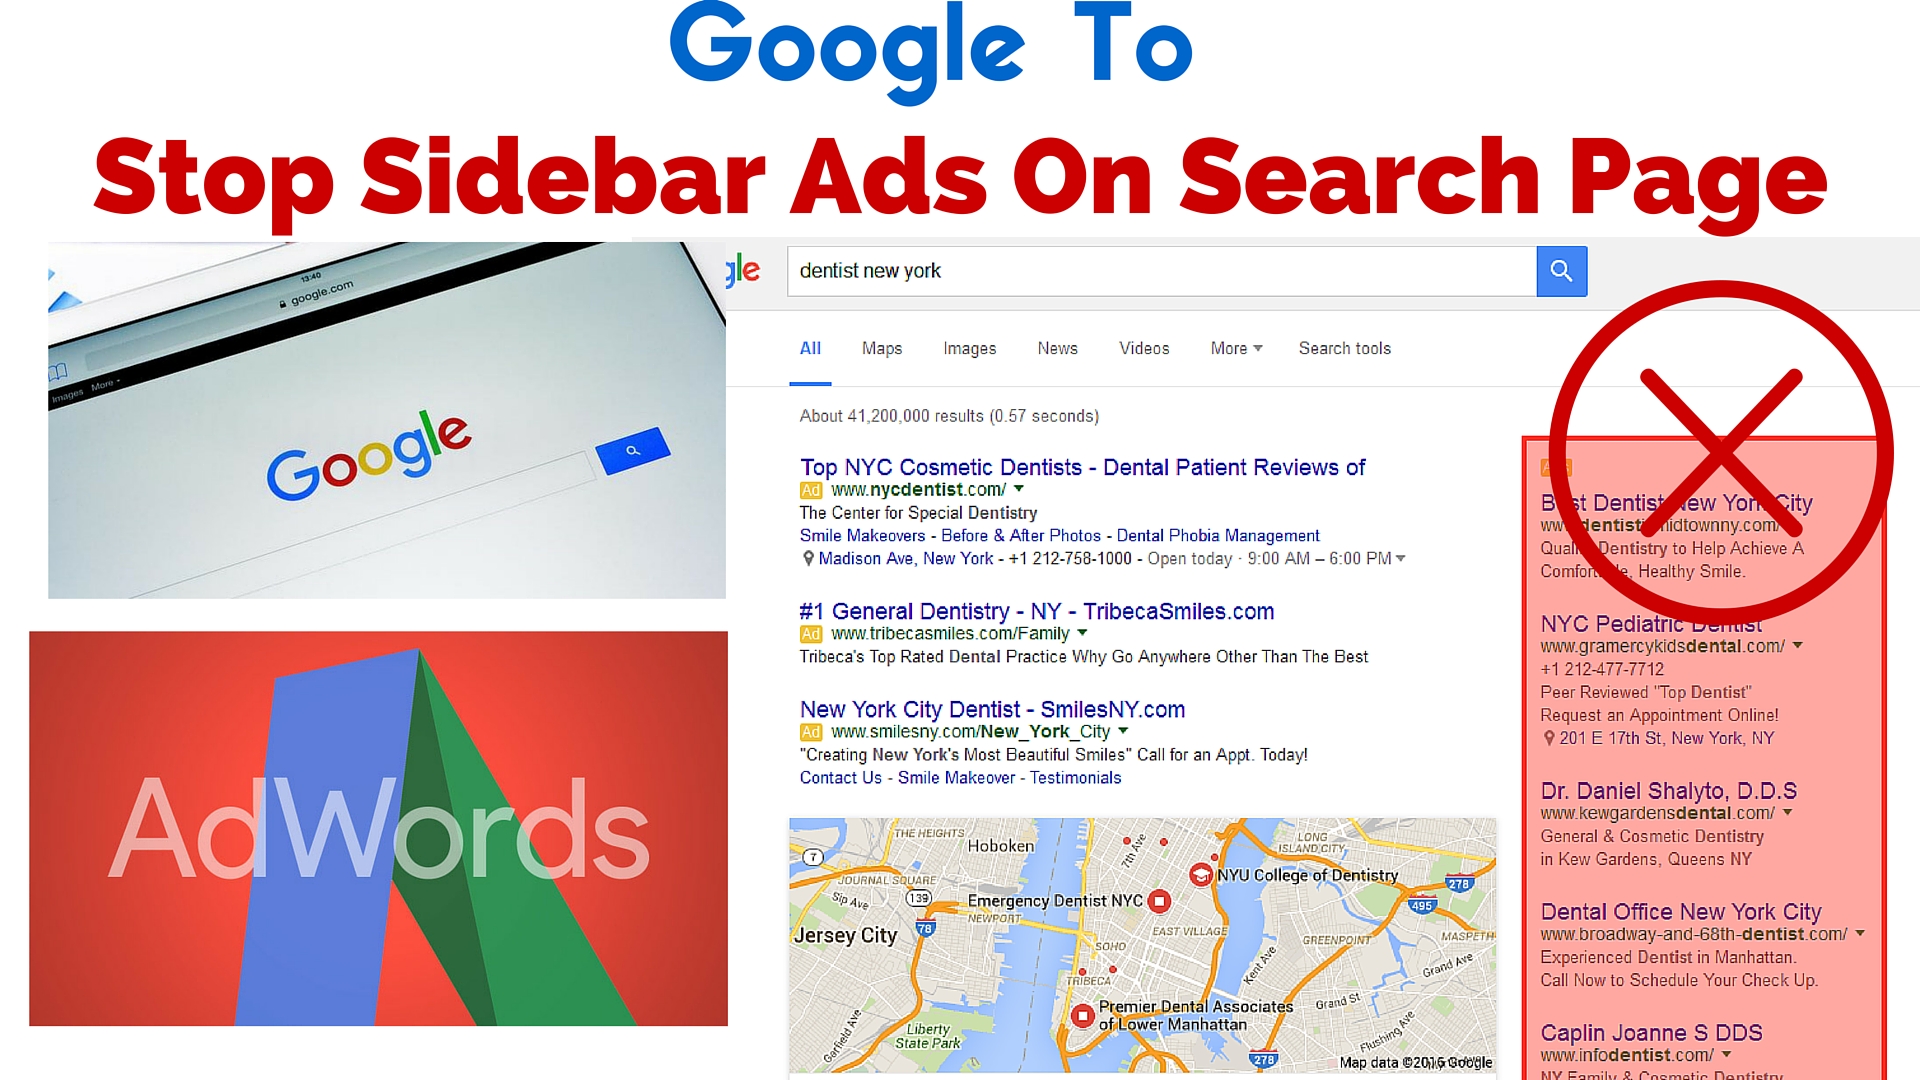 Google to Stop Sidebar Ads On Search Page